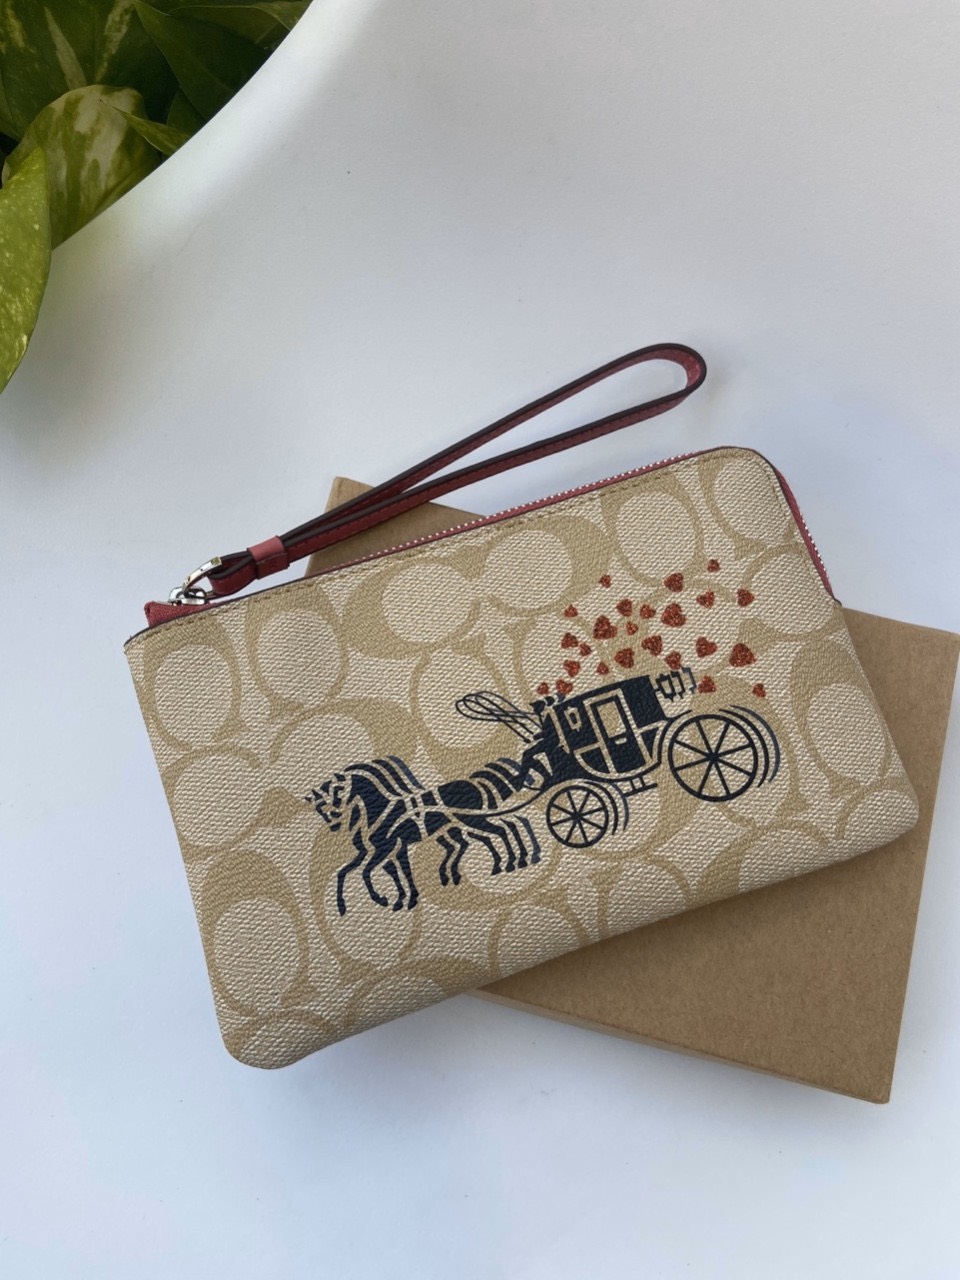 VÍ COACH MỎNG HỌA TIẾT XE NGỰA | CLUTCH COACH CORNER ZIP WRISTLET IN SIGNATURE CANVAS WITH HORSE AND CARRIAGE HEARTS 7